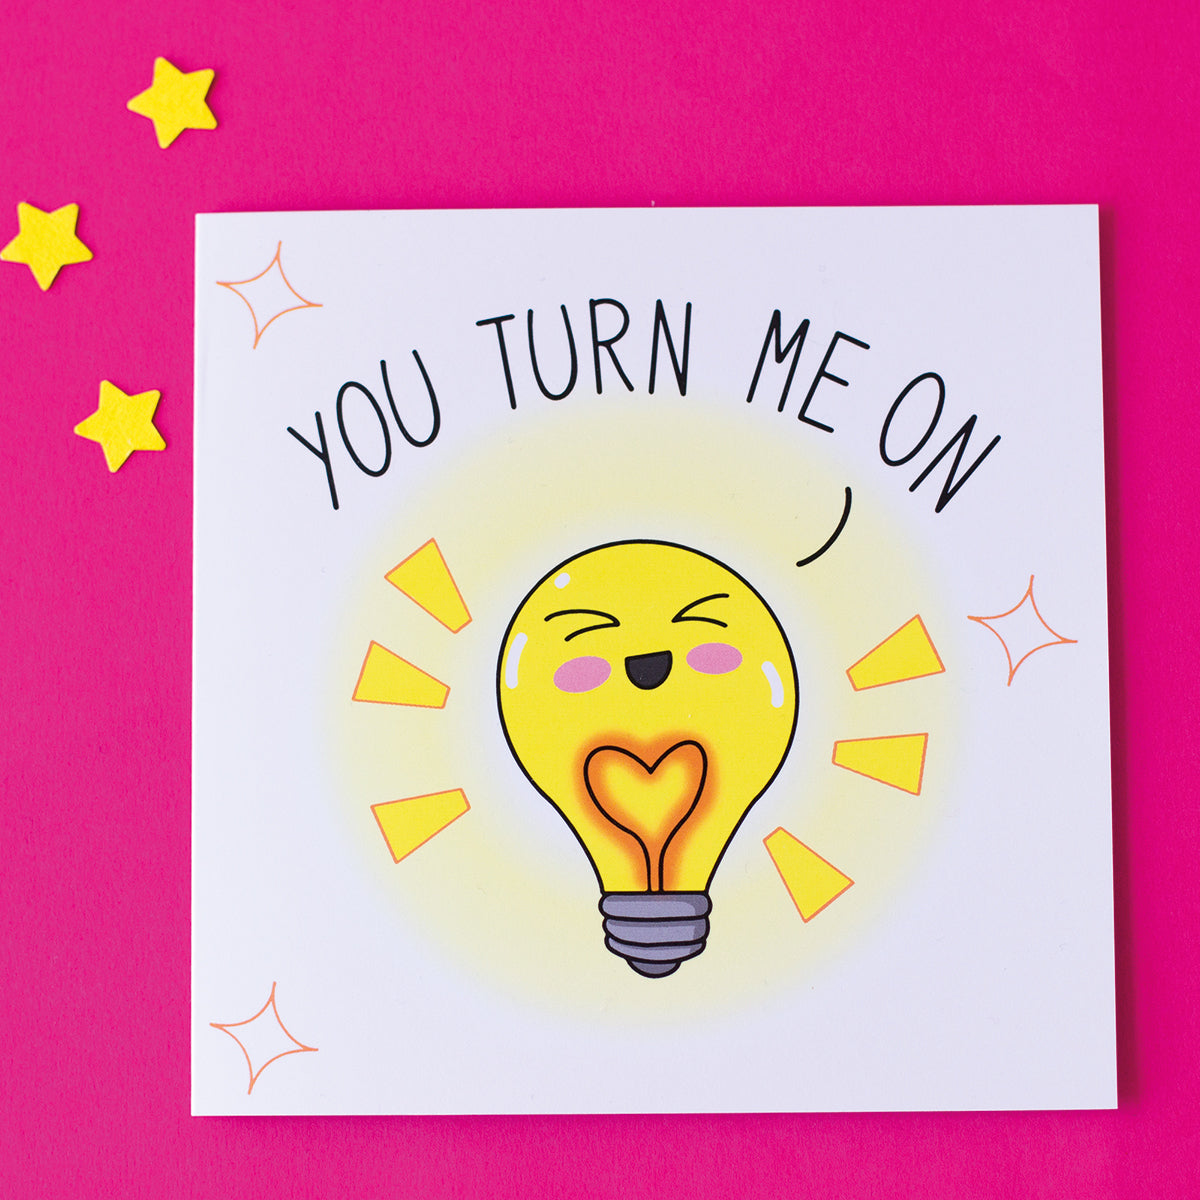 Funny valentine's anniversary card. Cute illustration of a lightbulb saying you turn me on. sat on a pink background with yellow stars